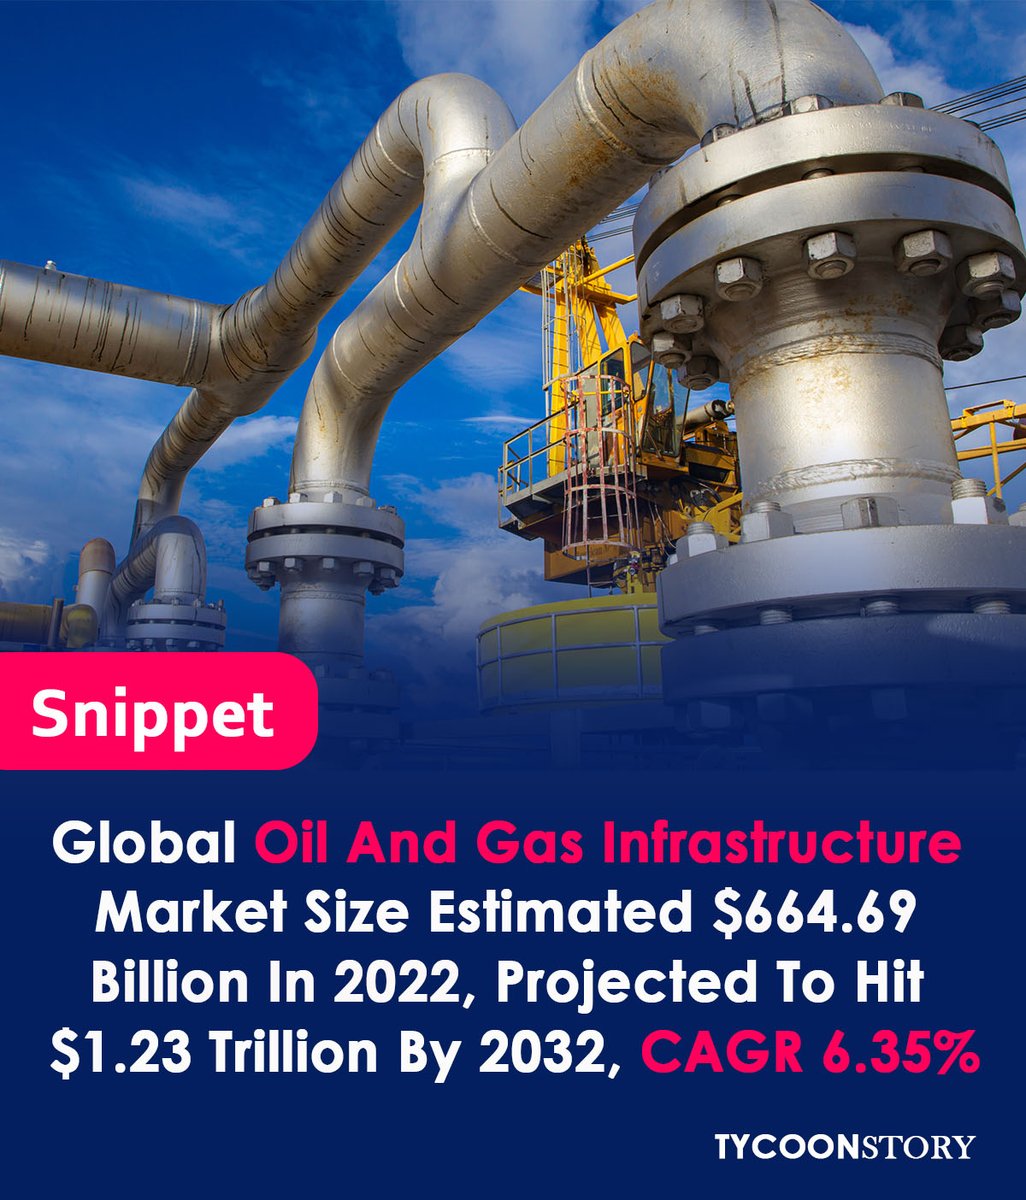 Global oil and gas infrastructure market is estimated to be worth $664.69 billion in 2022 and is projected to reach $1.23 trillion by 2032, growing at a compound annual growth rate (CAGR) of 6.35%
#satellitetechnology #marketvolatility #energysecurity #EnergyMarket #marketgrowth